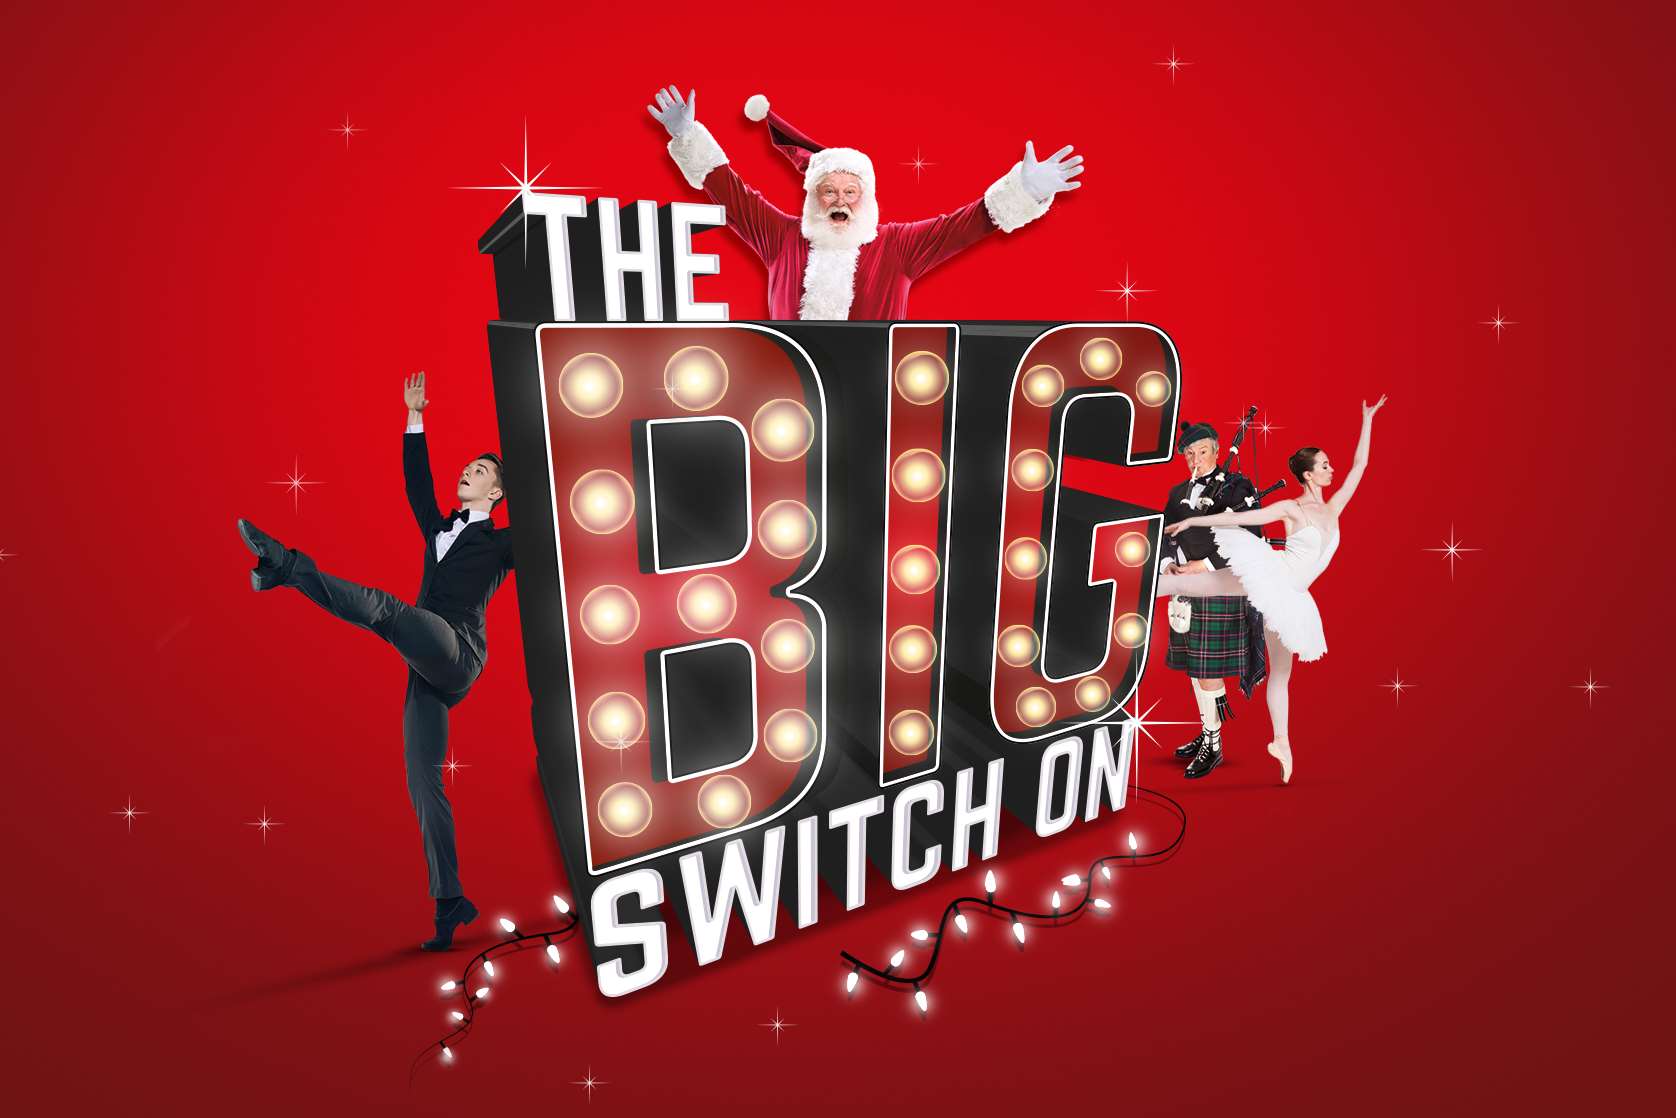 The Big Switch On will take place primarily indoors this year